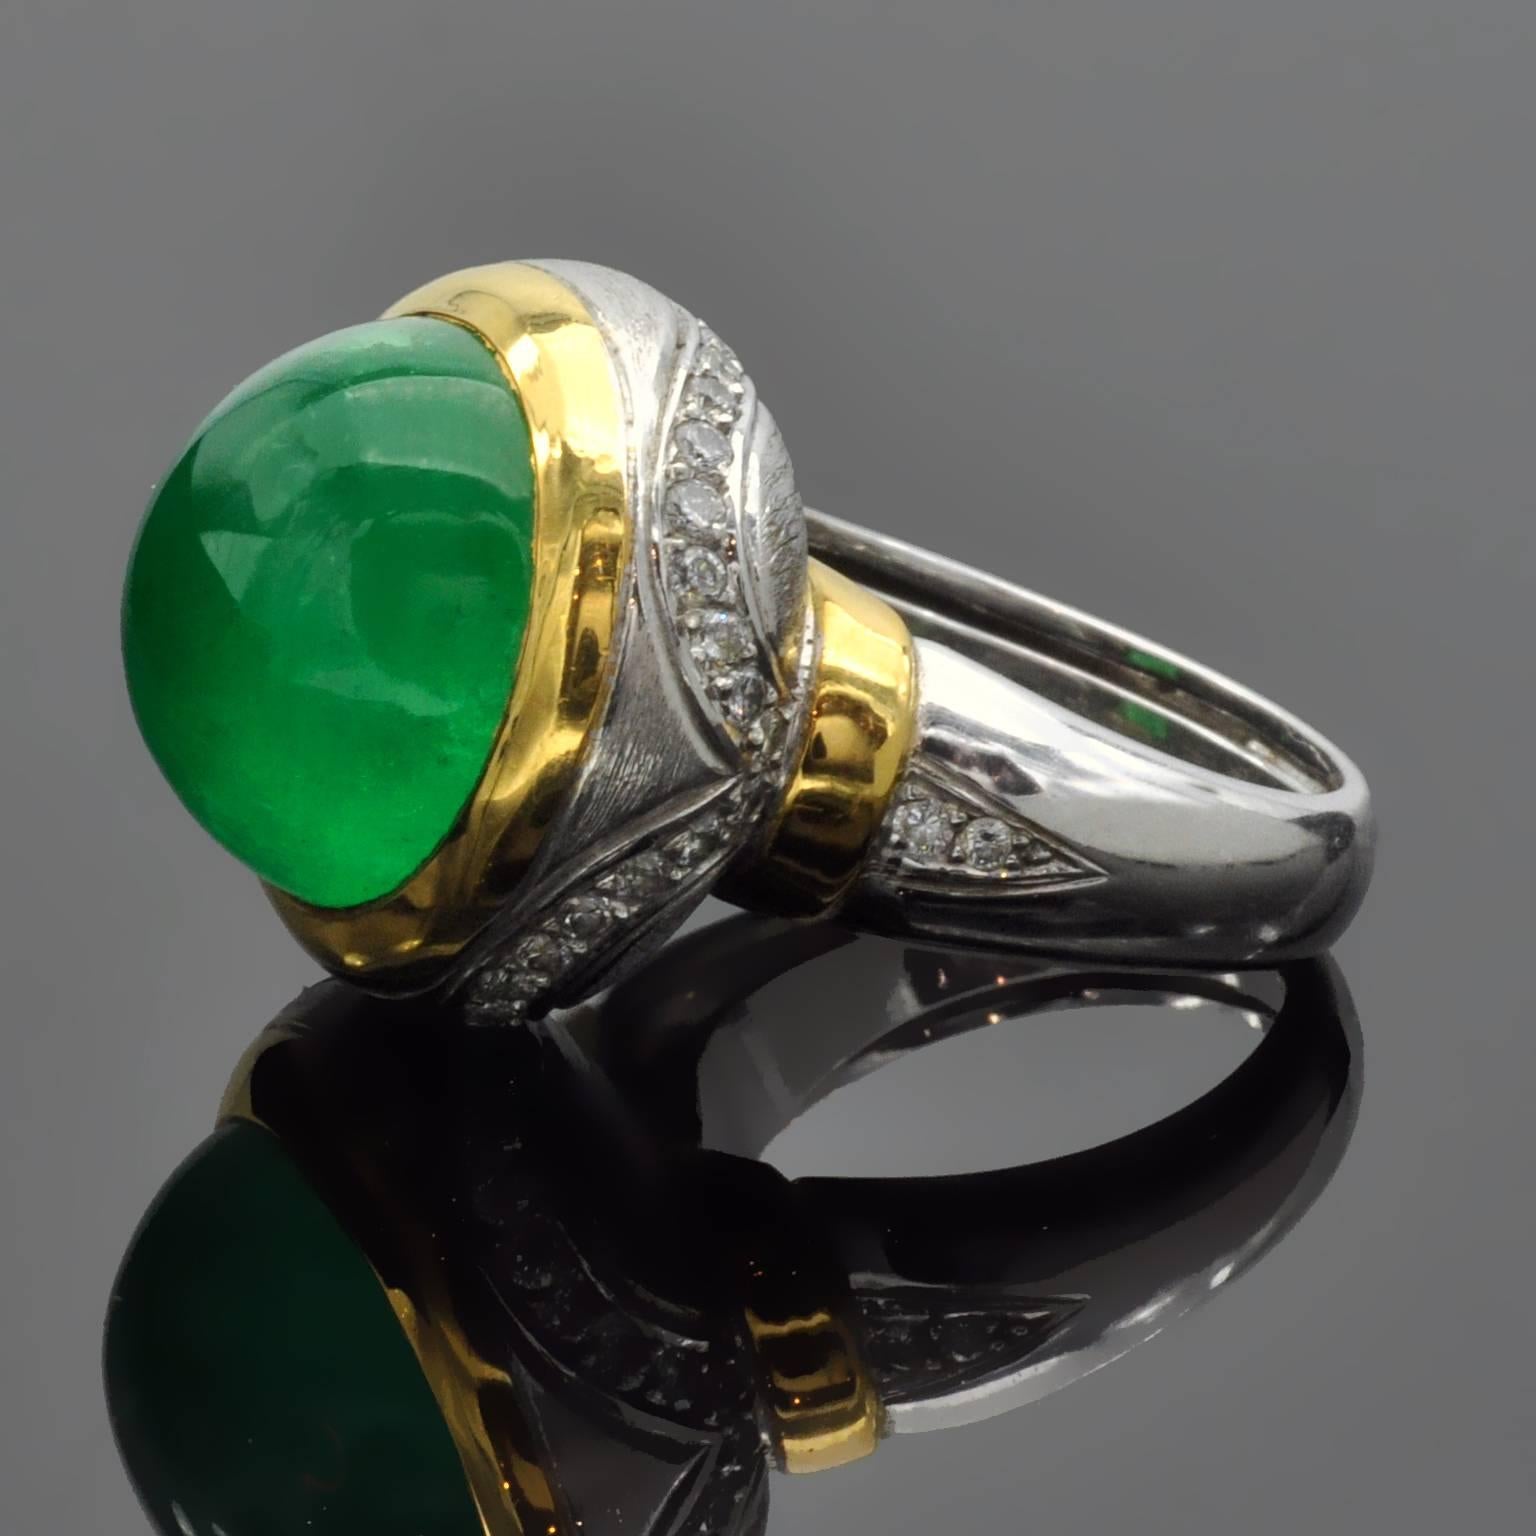 This is a truly unique handmade dome ring with a rounded turban shape. in its center a 13 carats  round Cabochon Emerald is framed in yellow gold. The rest of the ring is in white gold expertly crafted:  textured or shiny or engraved or set with